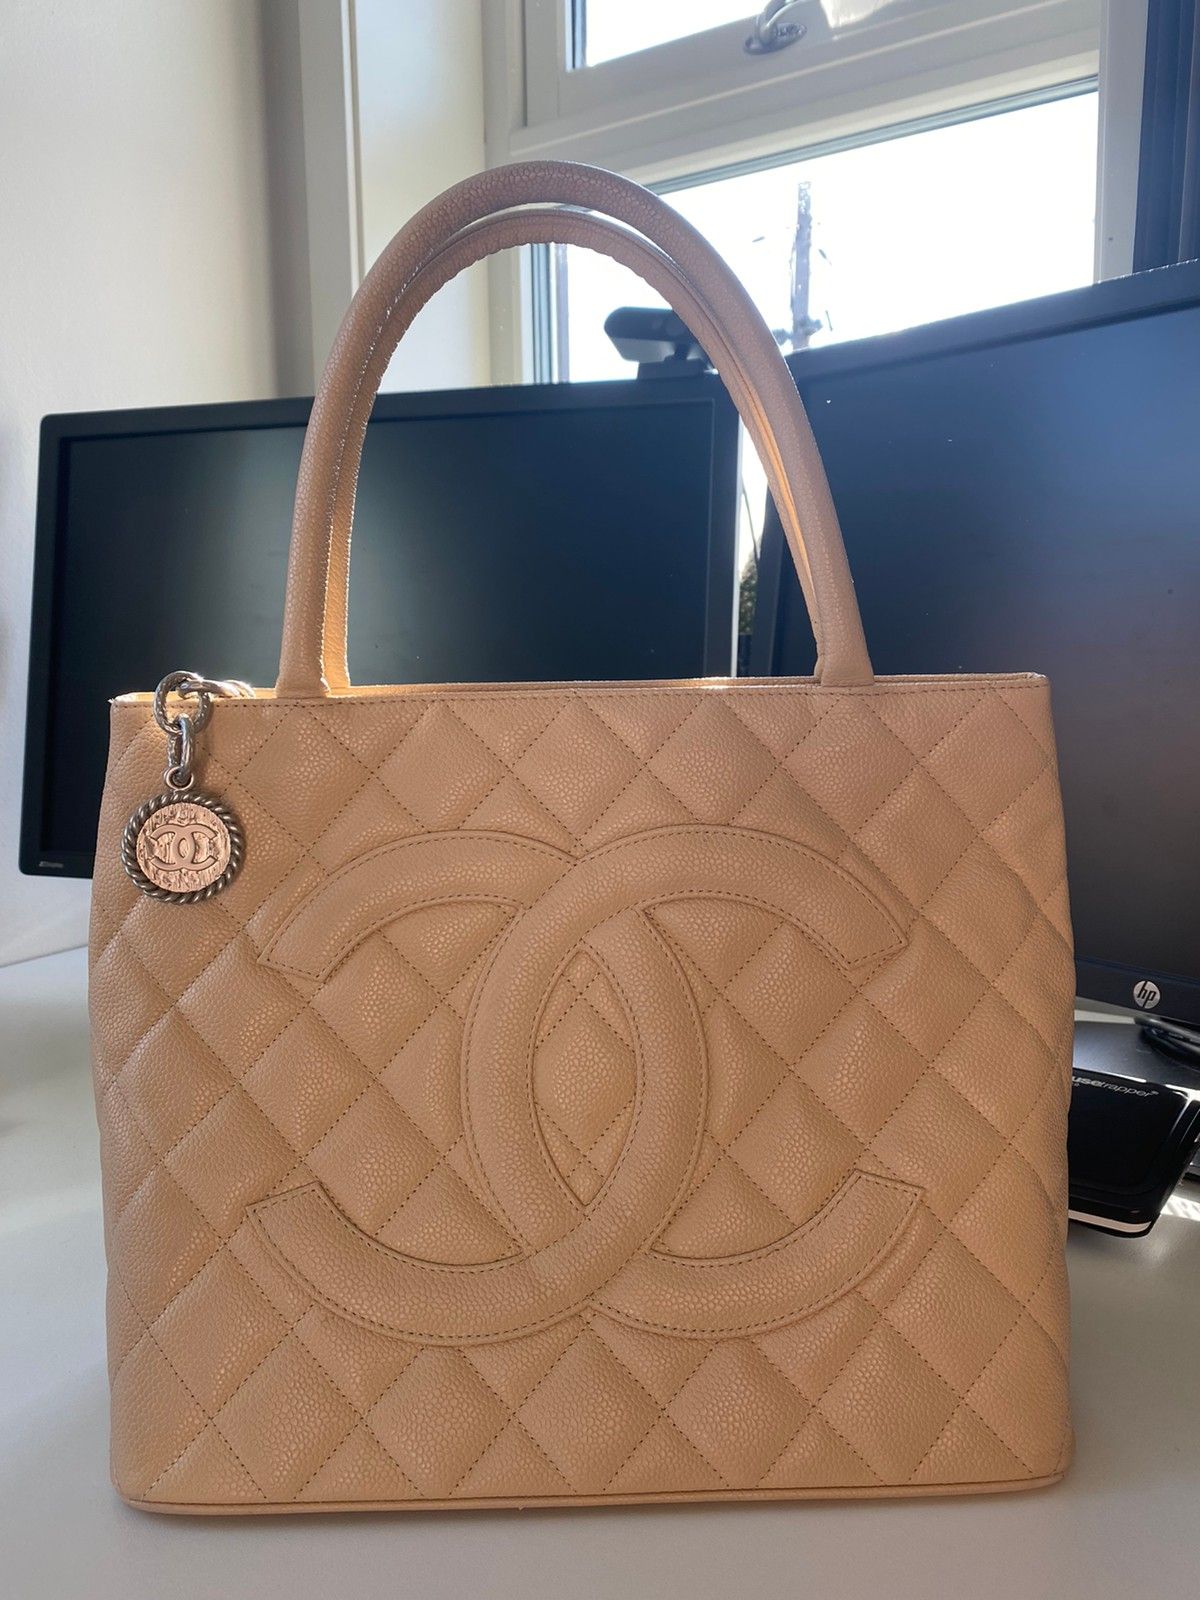 CHANEL MEDALLION Caviar Skin Leather Beige Tote Bag #2540 Rise-on